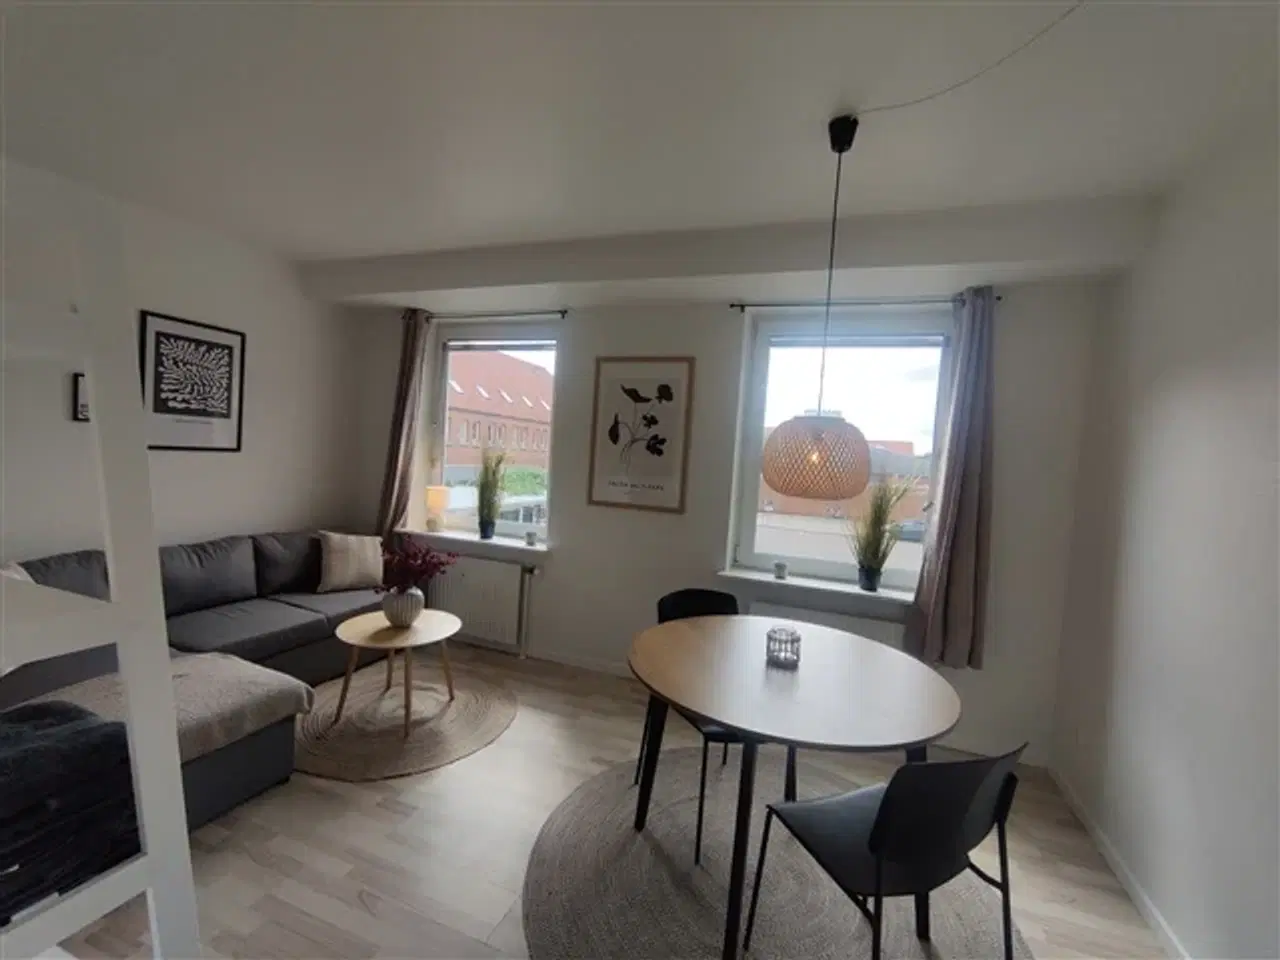 Billede 1 - Furnished, renovated apartment close to everything, Viborg